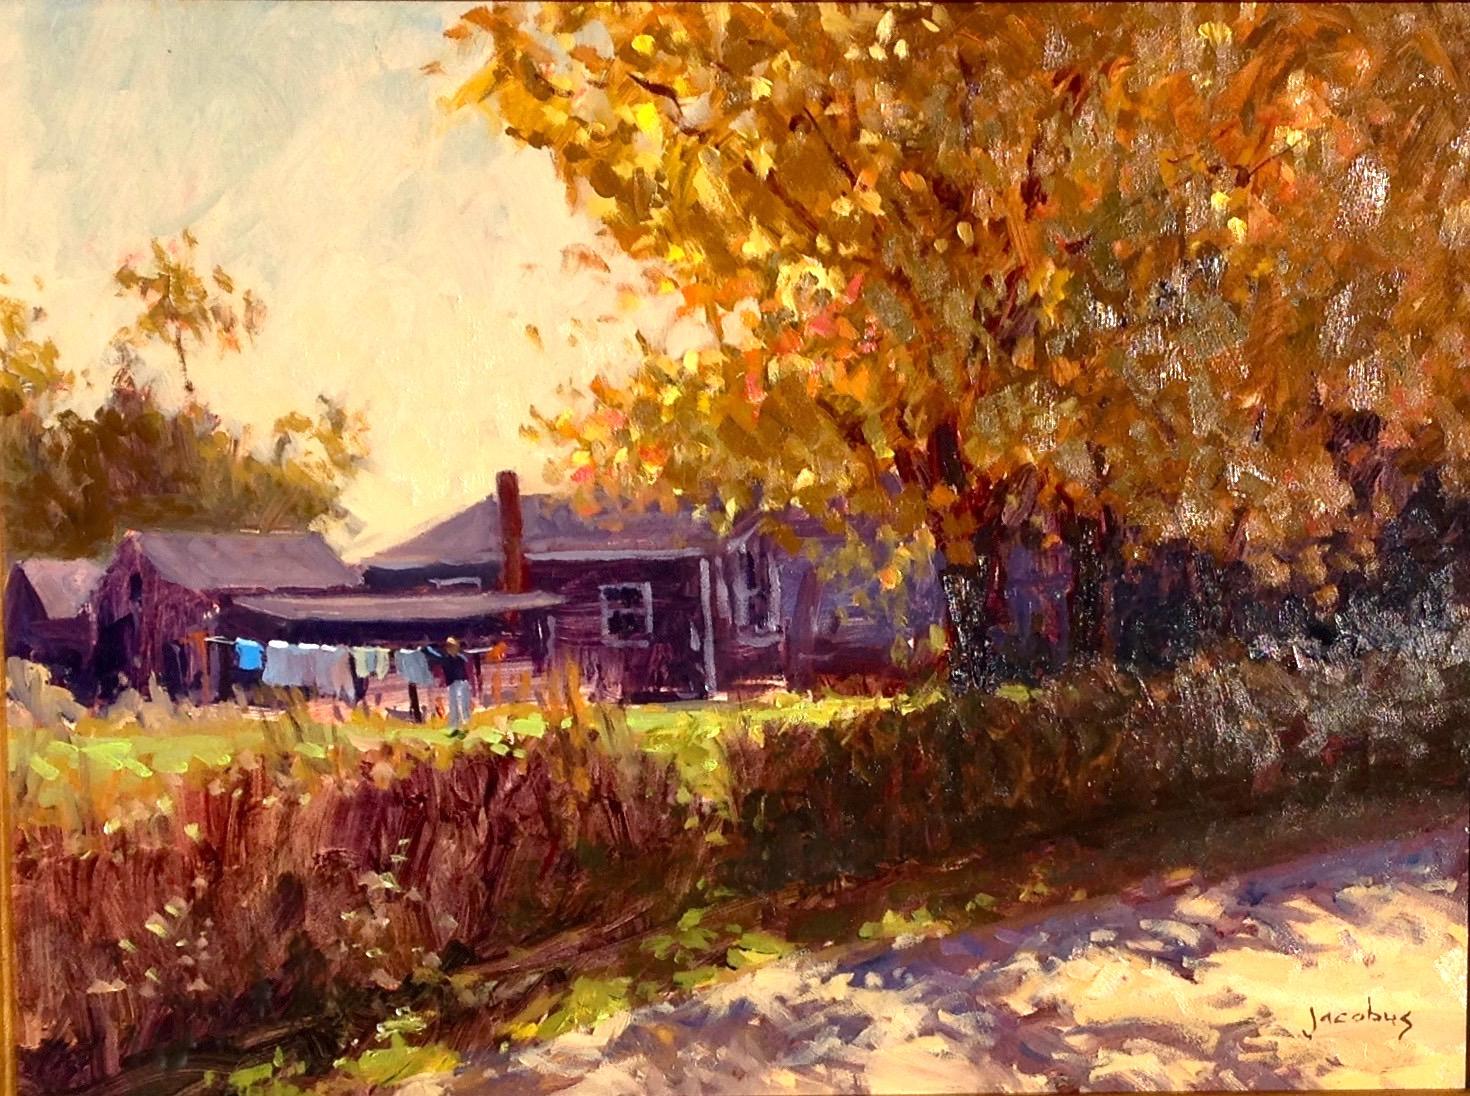 Jacobus Baas Landscape Painting - "Hangin Out To Dry" Sunny Maine Fall Scene